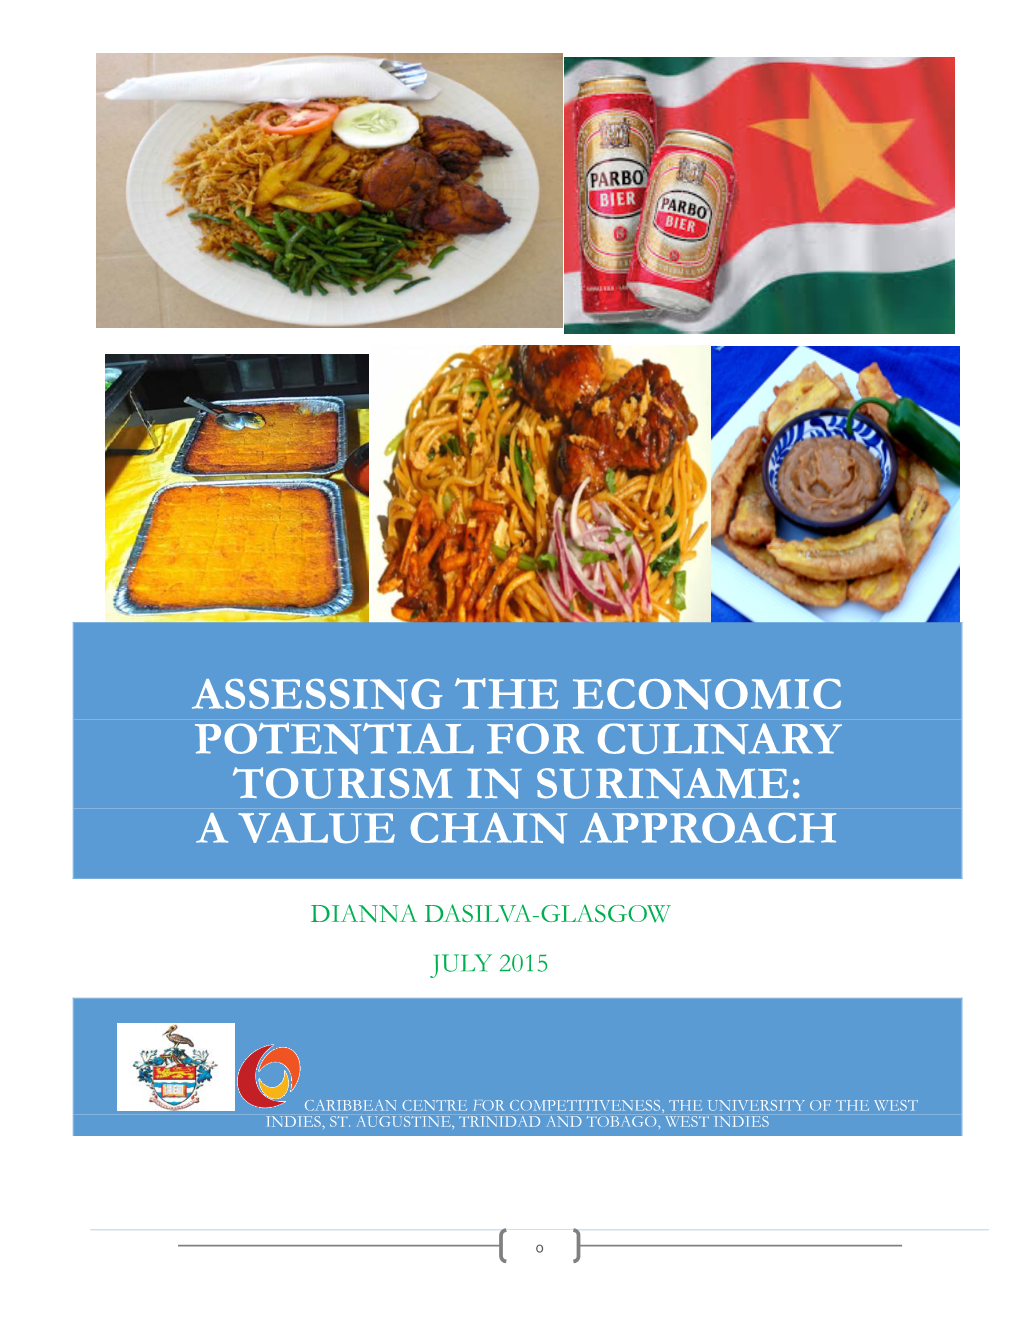 Assessing the Economic Potential for Culinary Tourism in Suriname: a Value Chain Approach